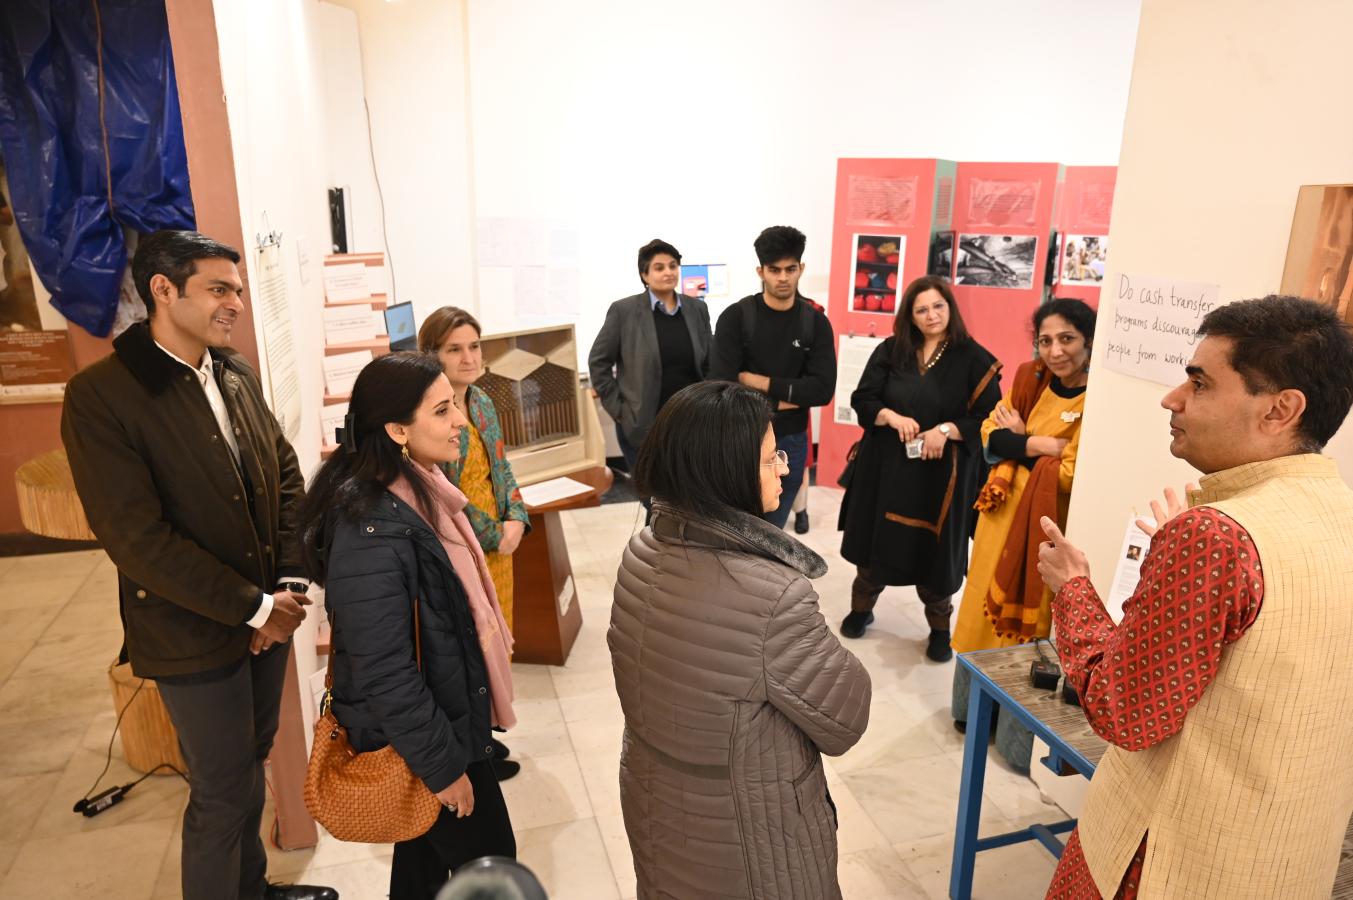 People interacting with an exhibition